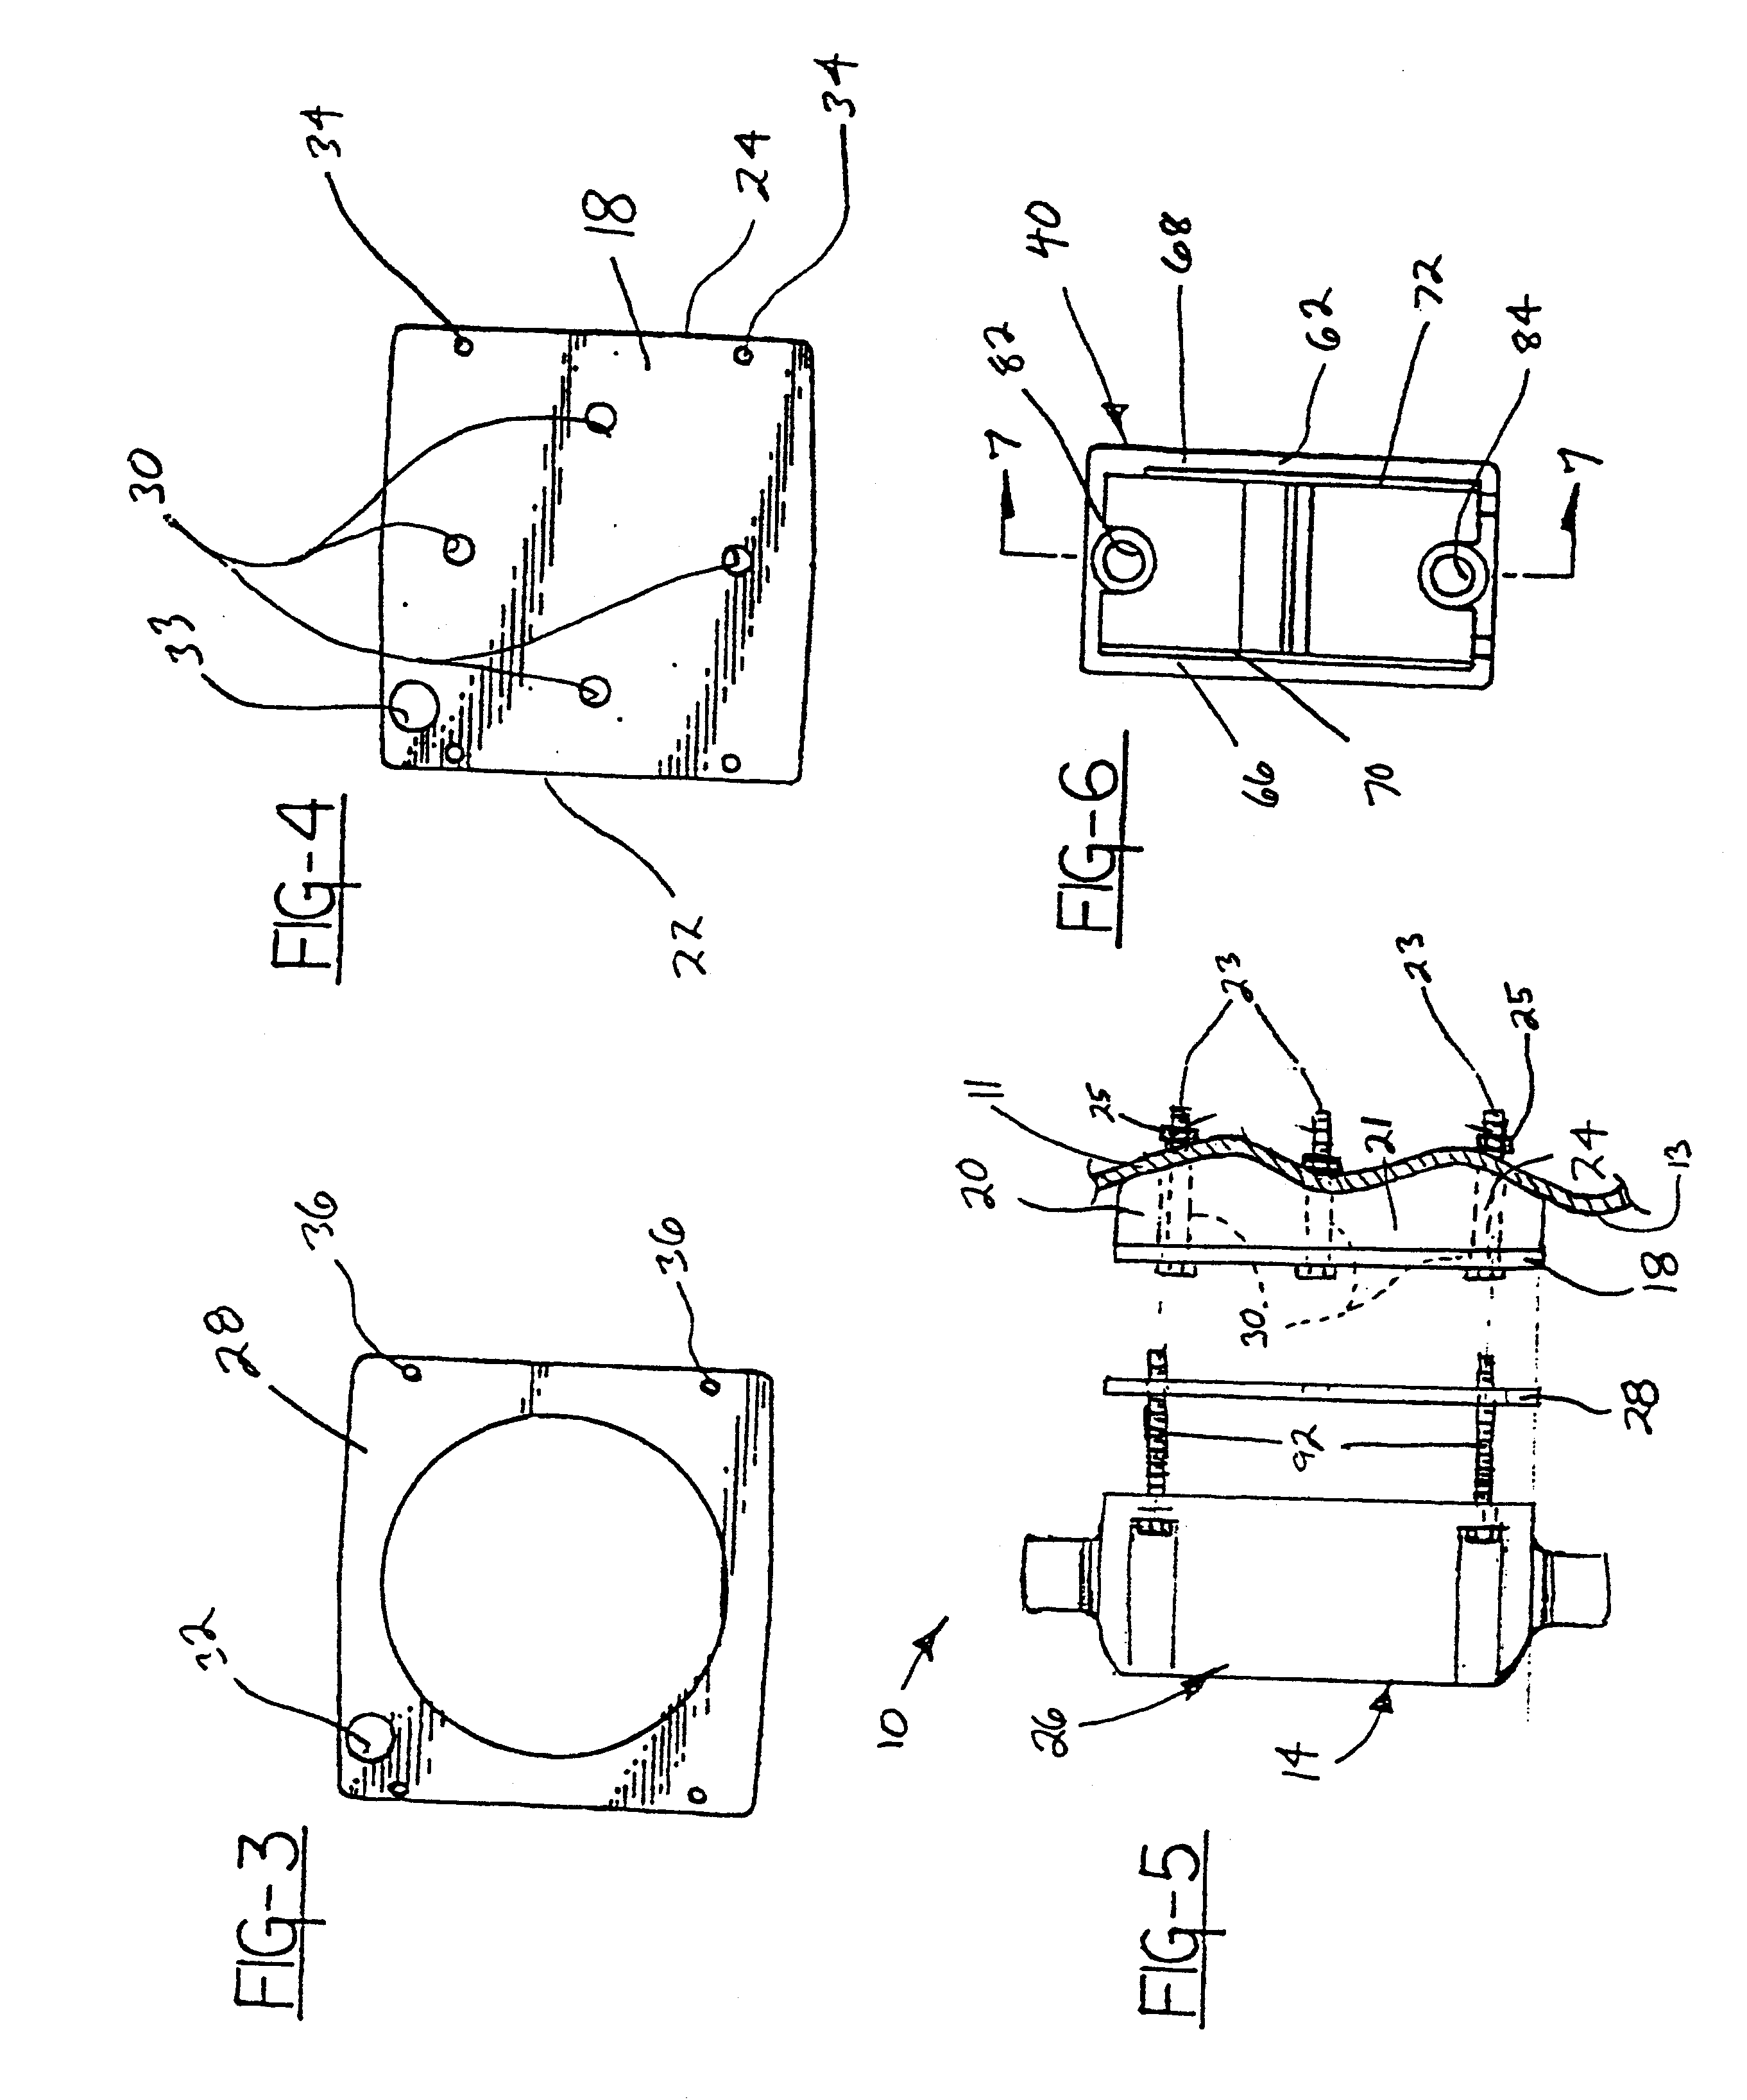 Mounting arrangement for crossing arm